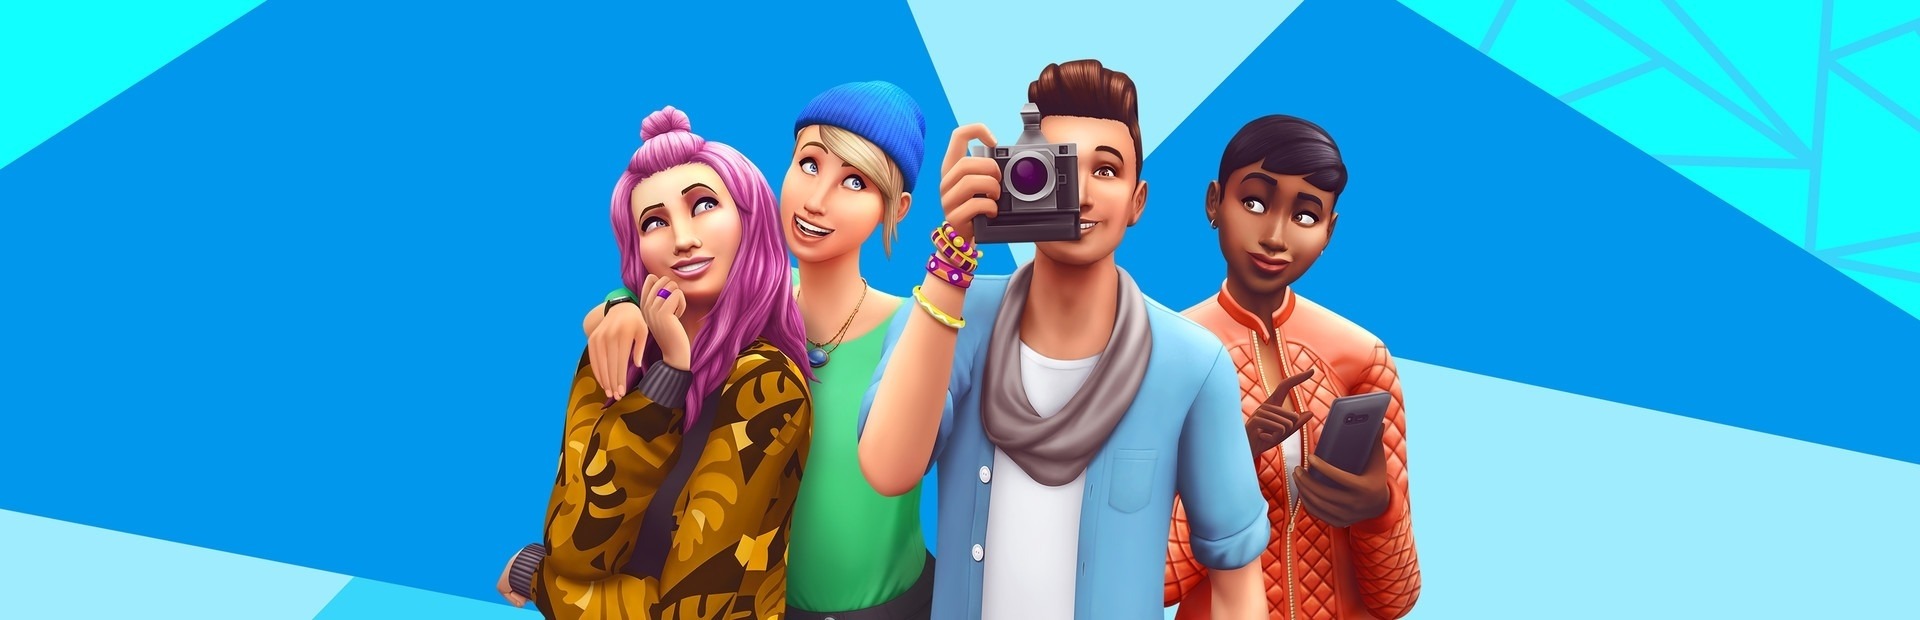 The Sims 4 + The Sims 4 Cztery pory roku